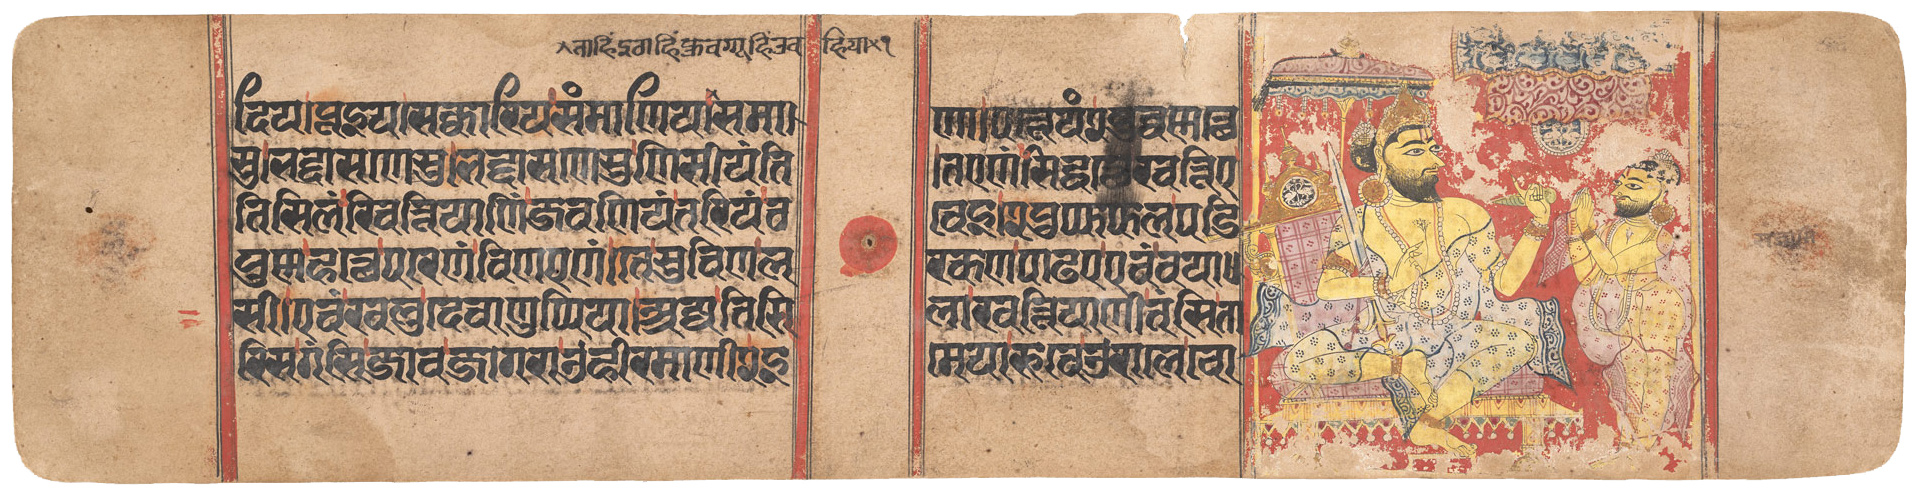 "King Siddharta Listens to an Astrologer Forecast the Conception and Birth of His Son, the Jina Mahavira," from a Kalpasutra manuscript, late 14th century, India, opaque watercolor on paper, 8.6 x 35.1 cm (The Metropolitan Museum of Art, New York)